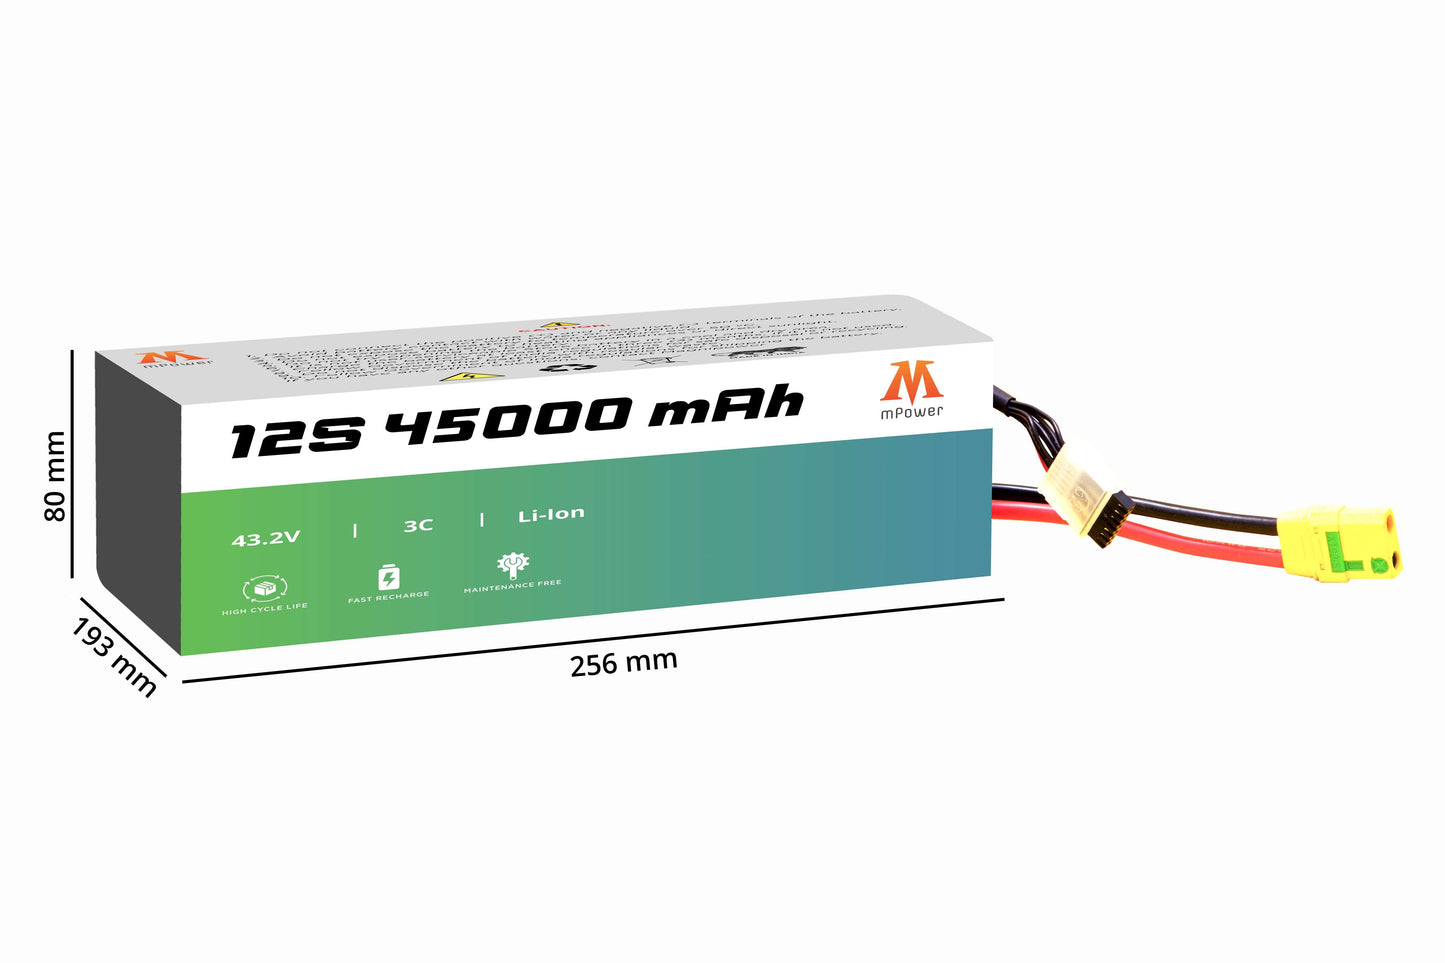 mPower 12S 45000mAh Lithium-Ion Battery for Delivery Drones